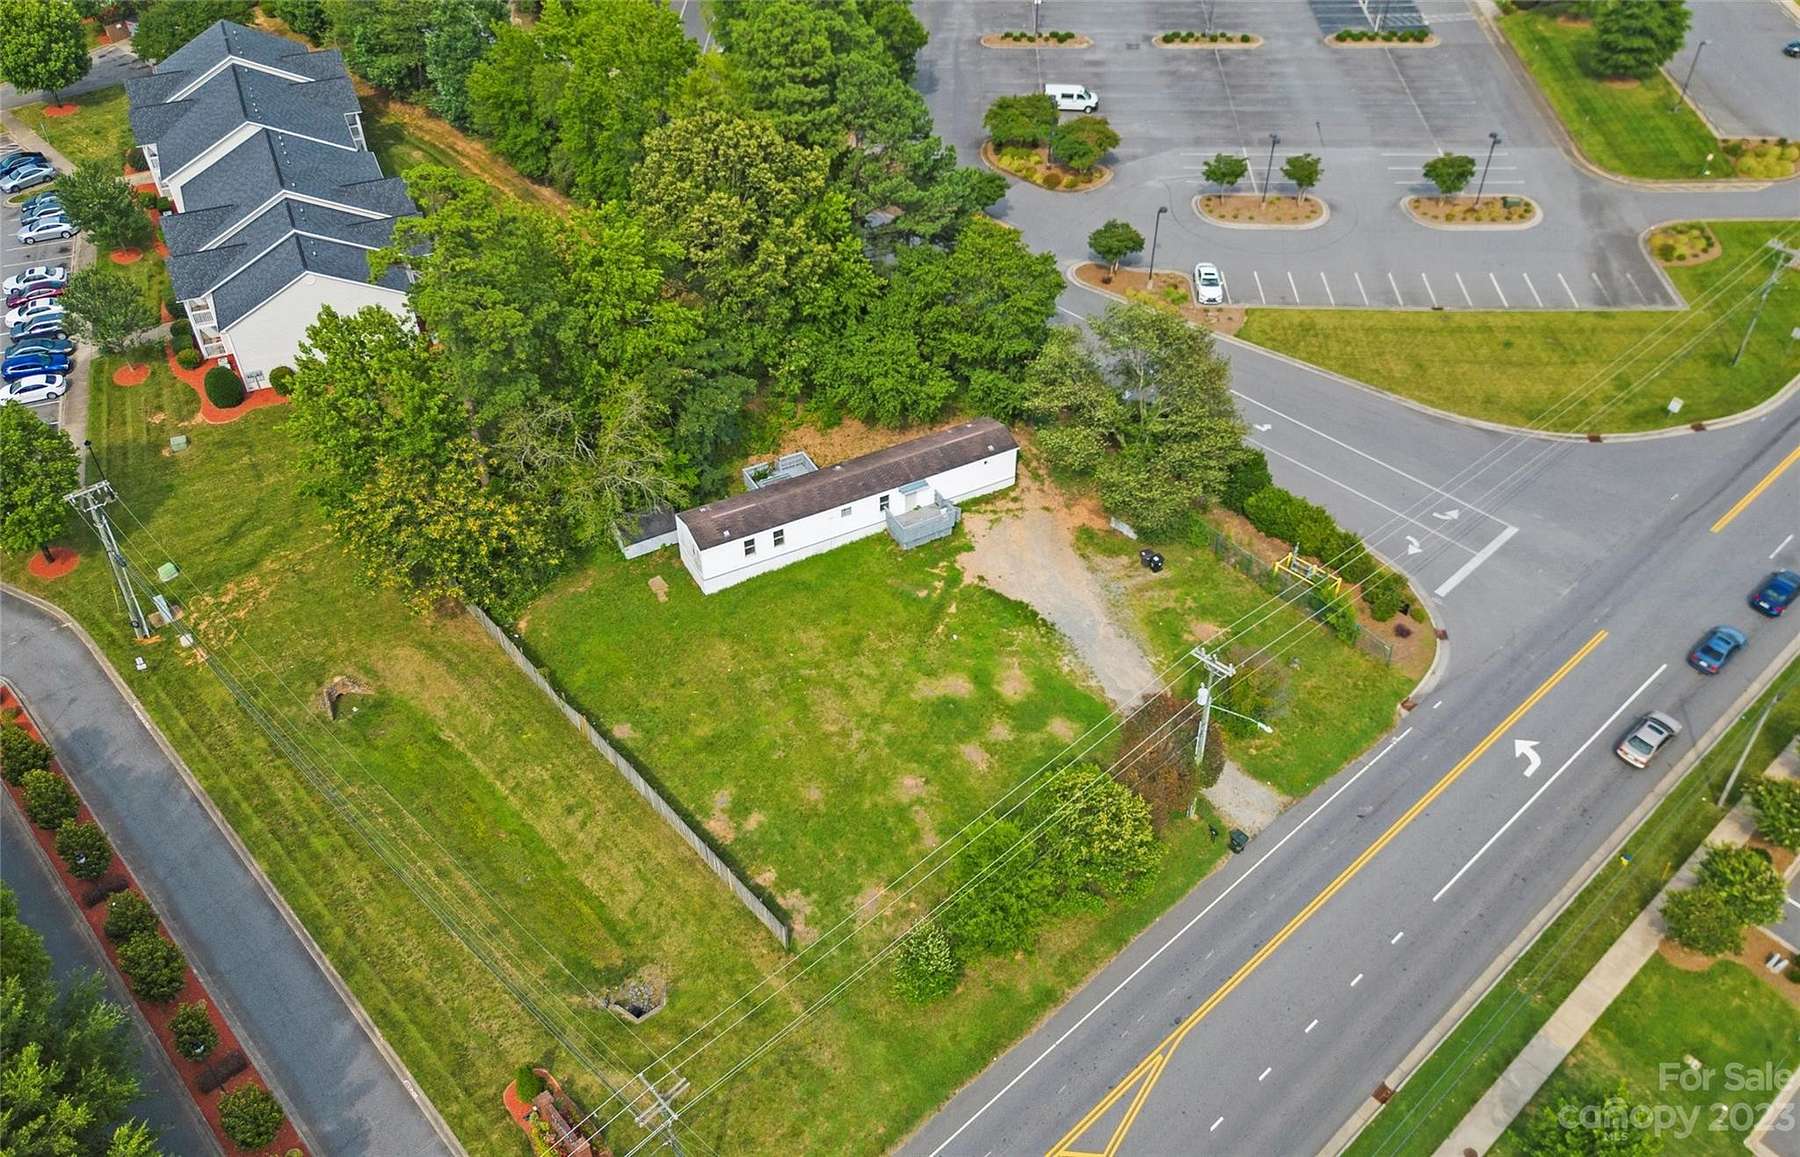 0.48 Acres of Mixed-Use Land for Sale in Concord, North Carolina